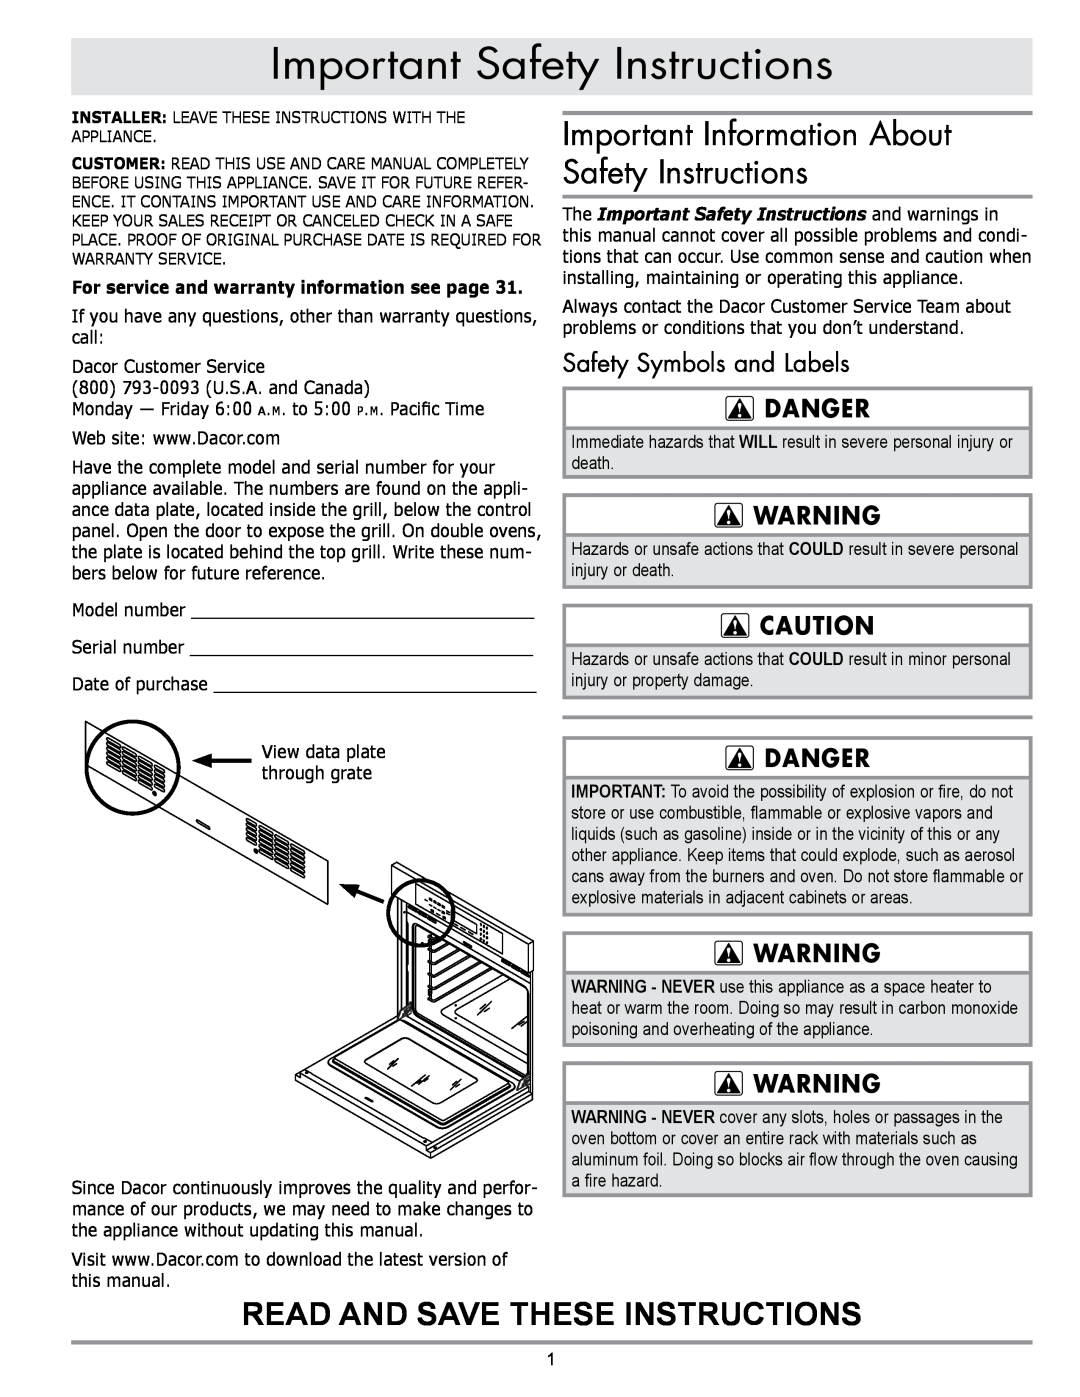 Sears EORD230 Important Safety Instructions, Important Information About Safety Instructions, Safety Symbols and Labels 